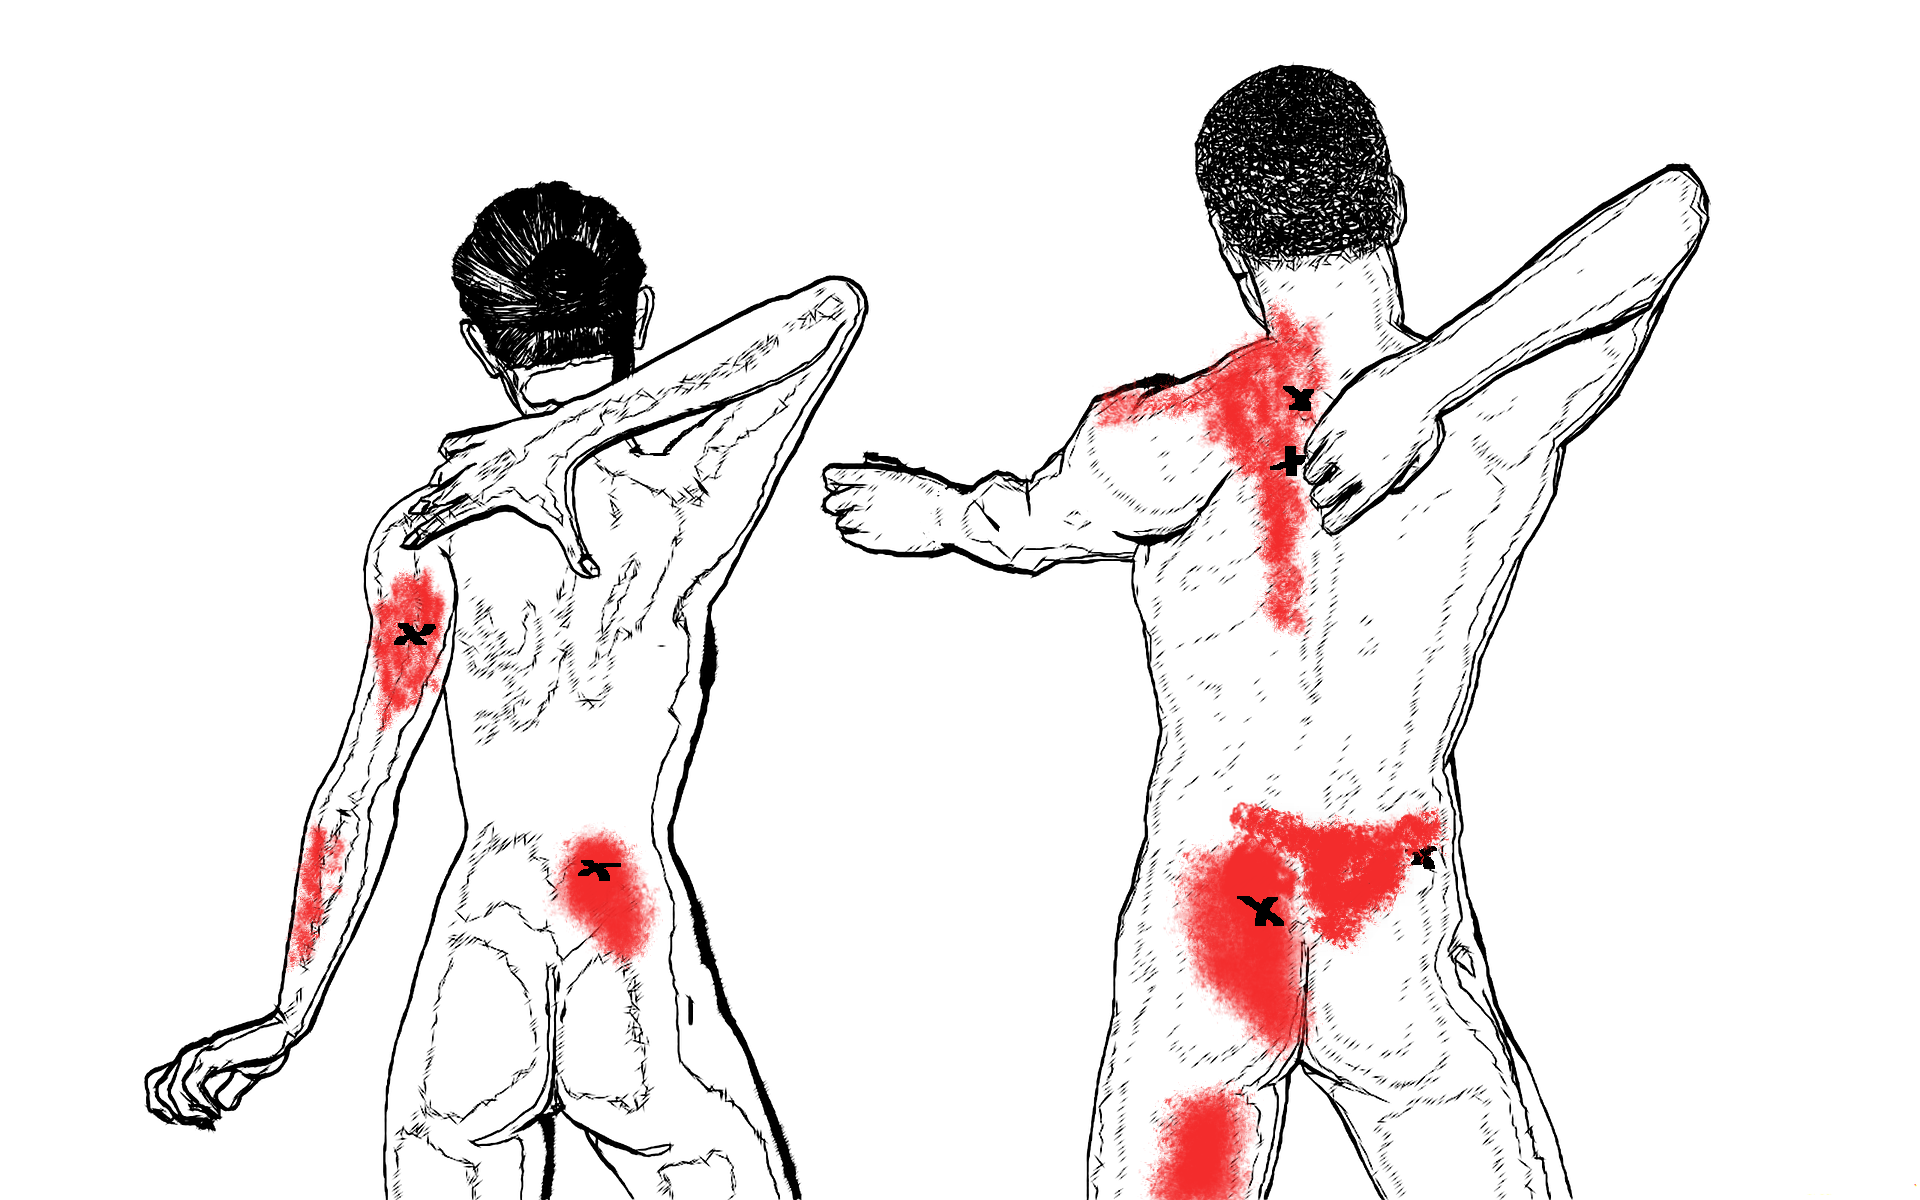 About myofascial trigger points